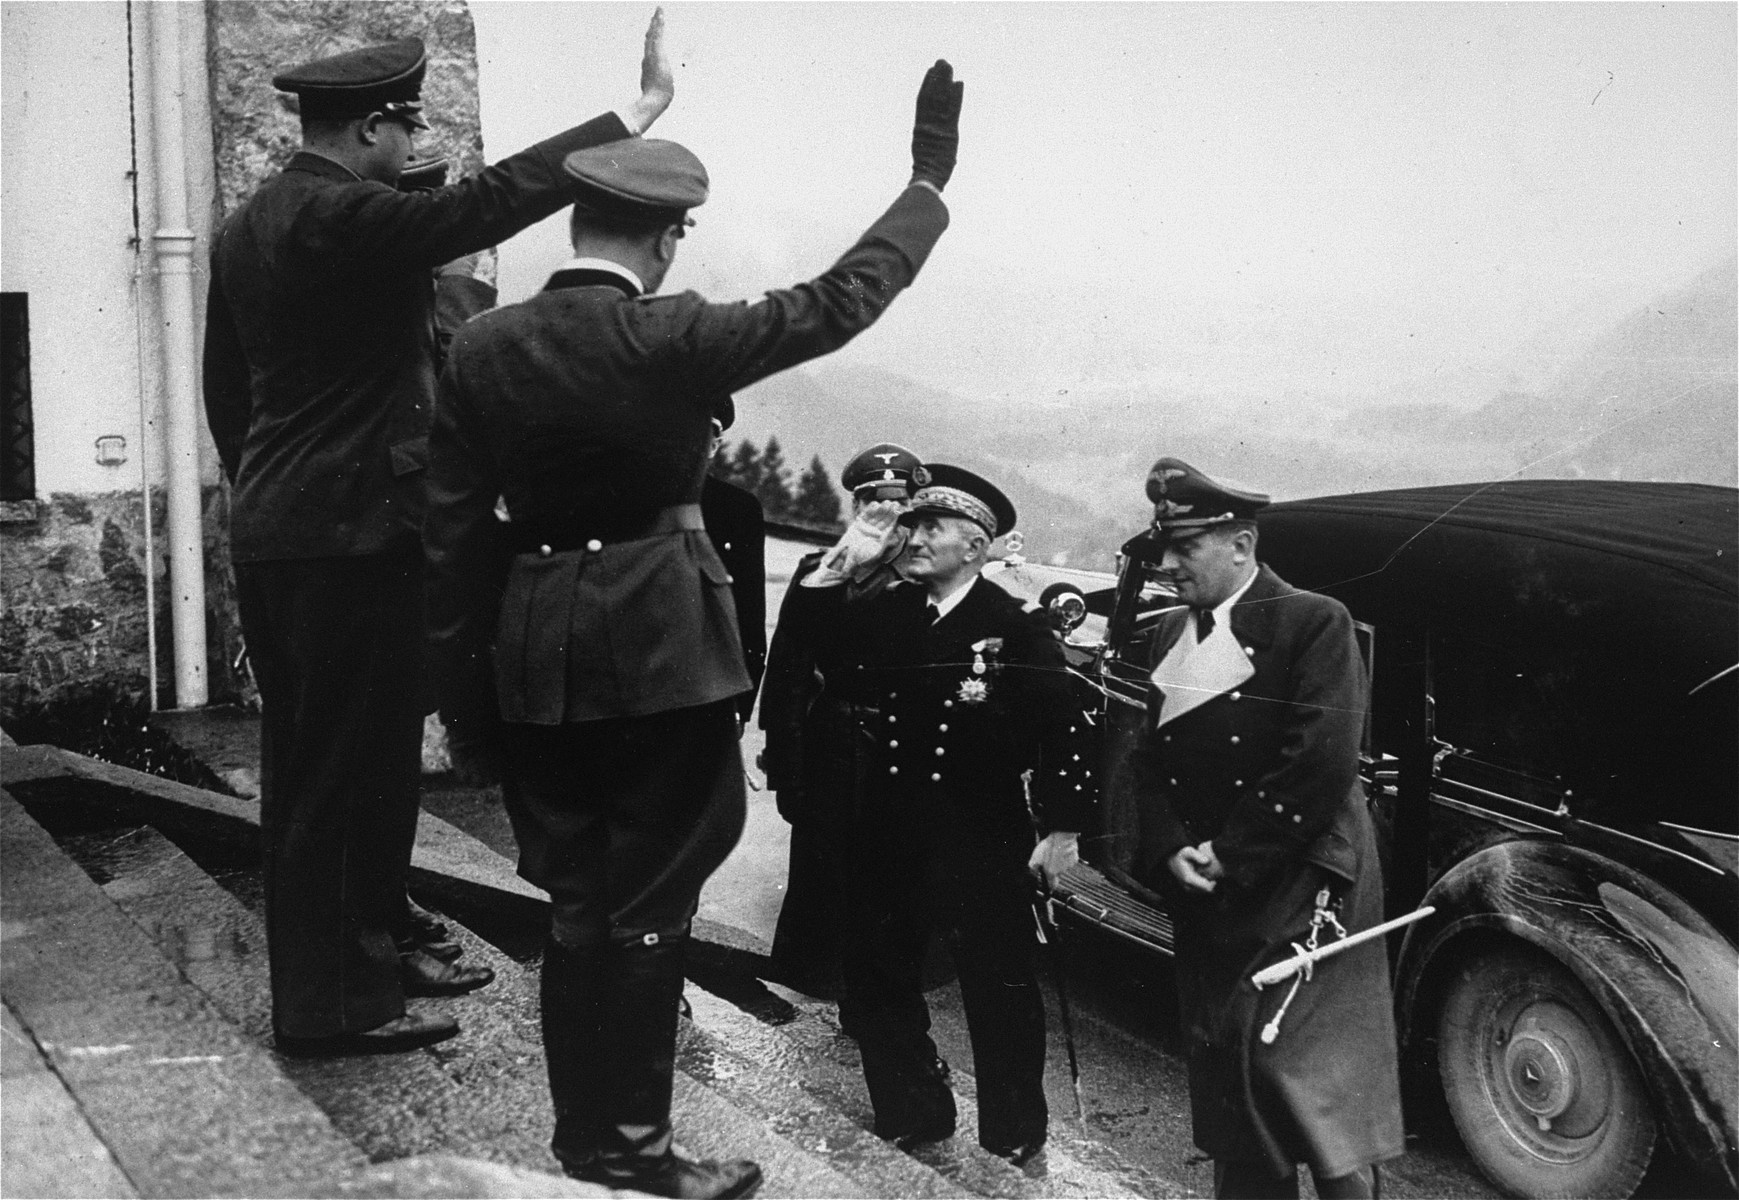 Adolf Hitler salutes Admiral Francois Darlan upon his arrival at the Berghof